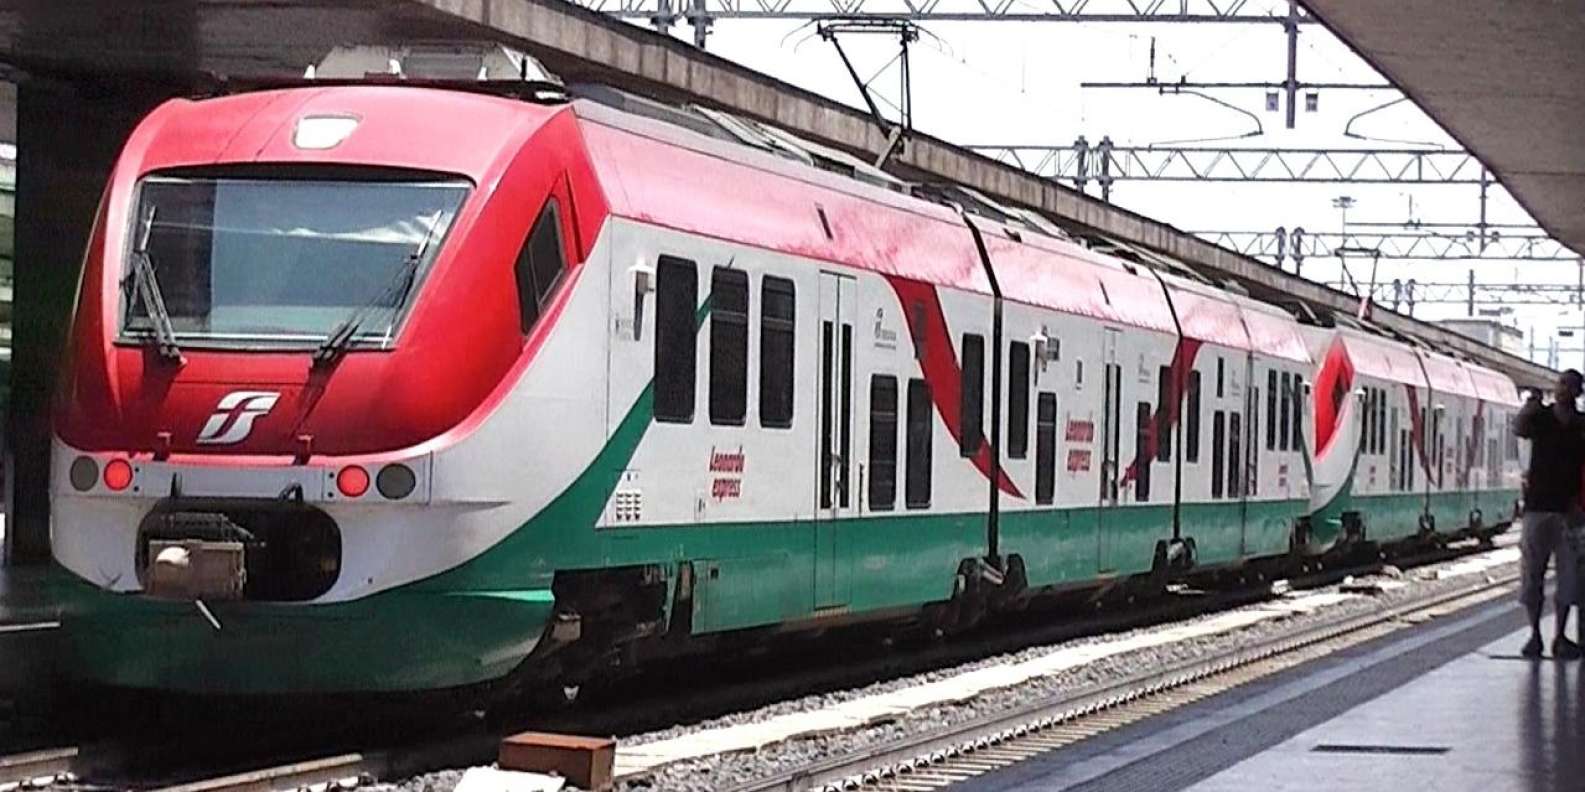 Leonardo Express Train Ticket from/to Fiumicino Airport | GetYourGuide